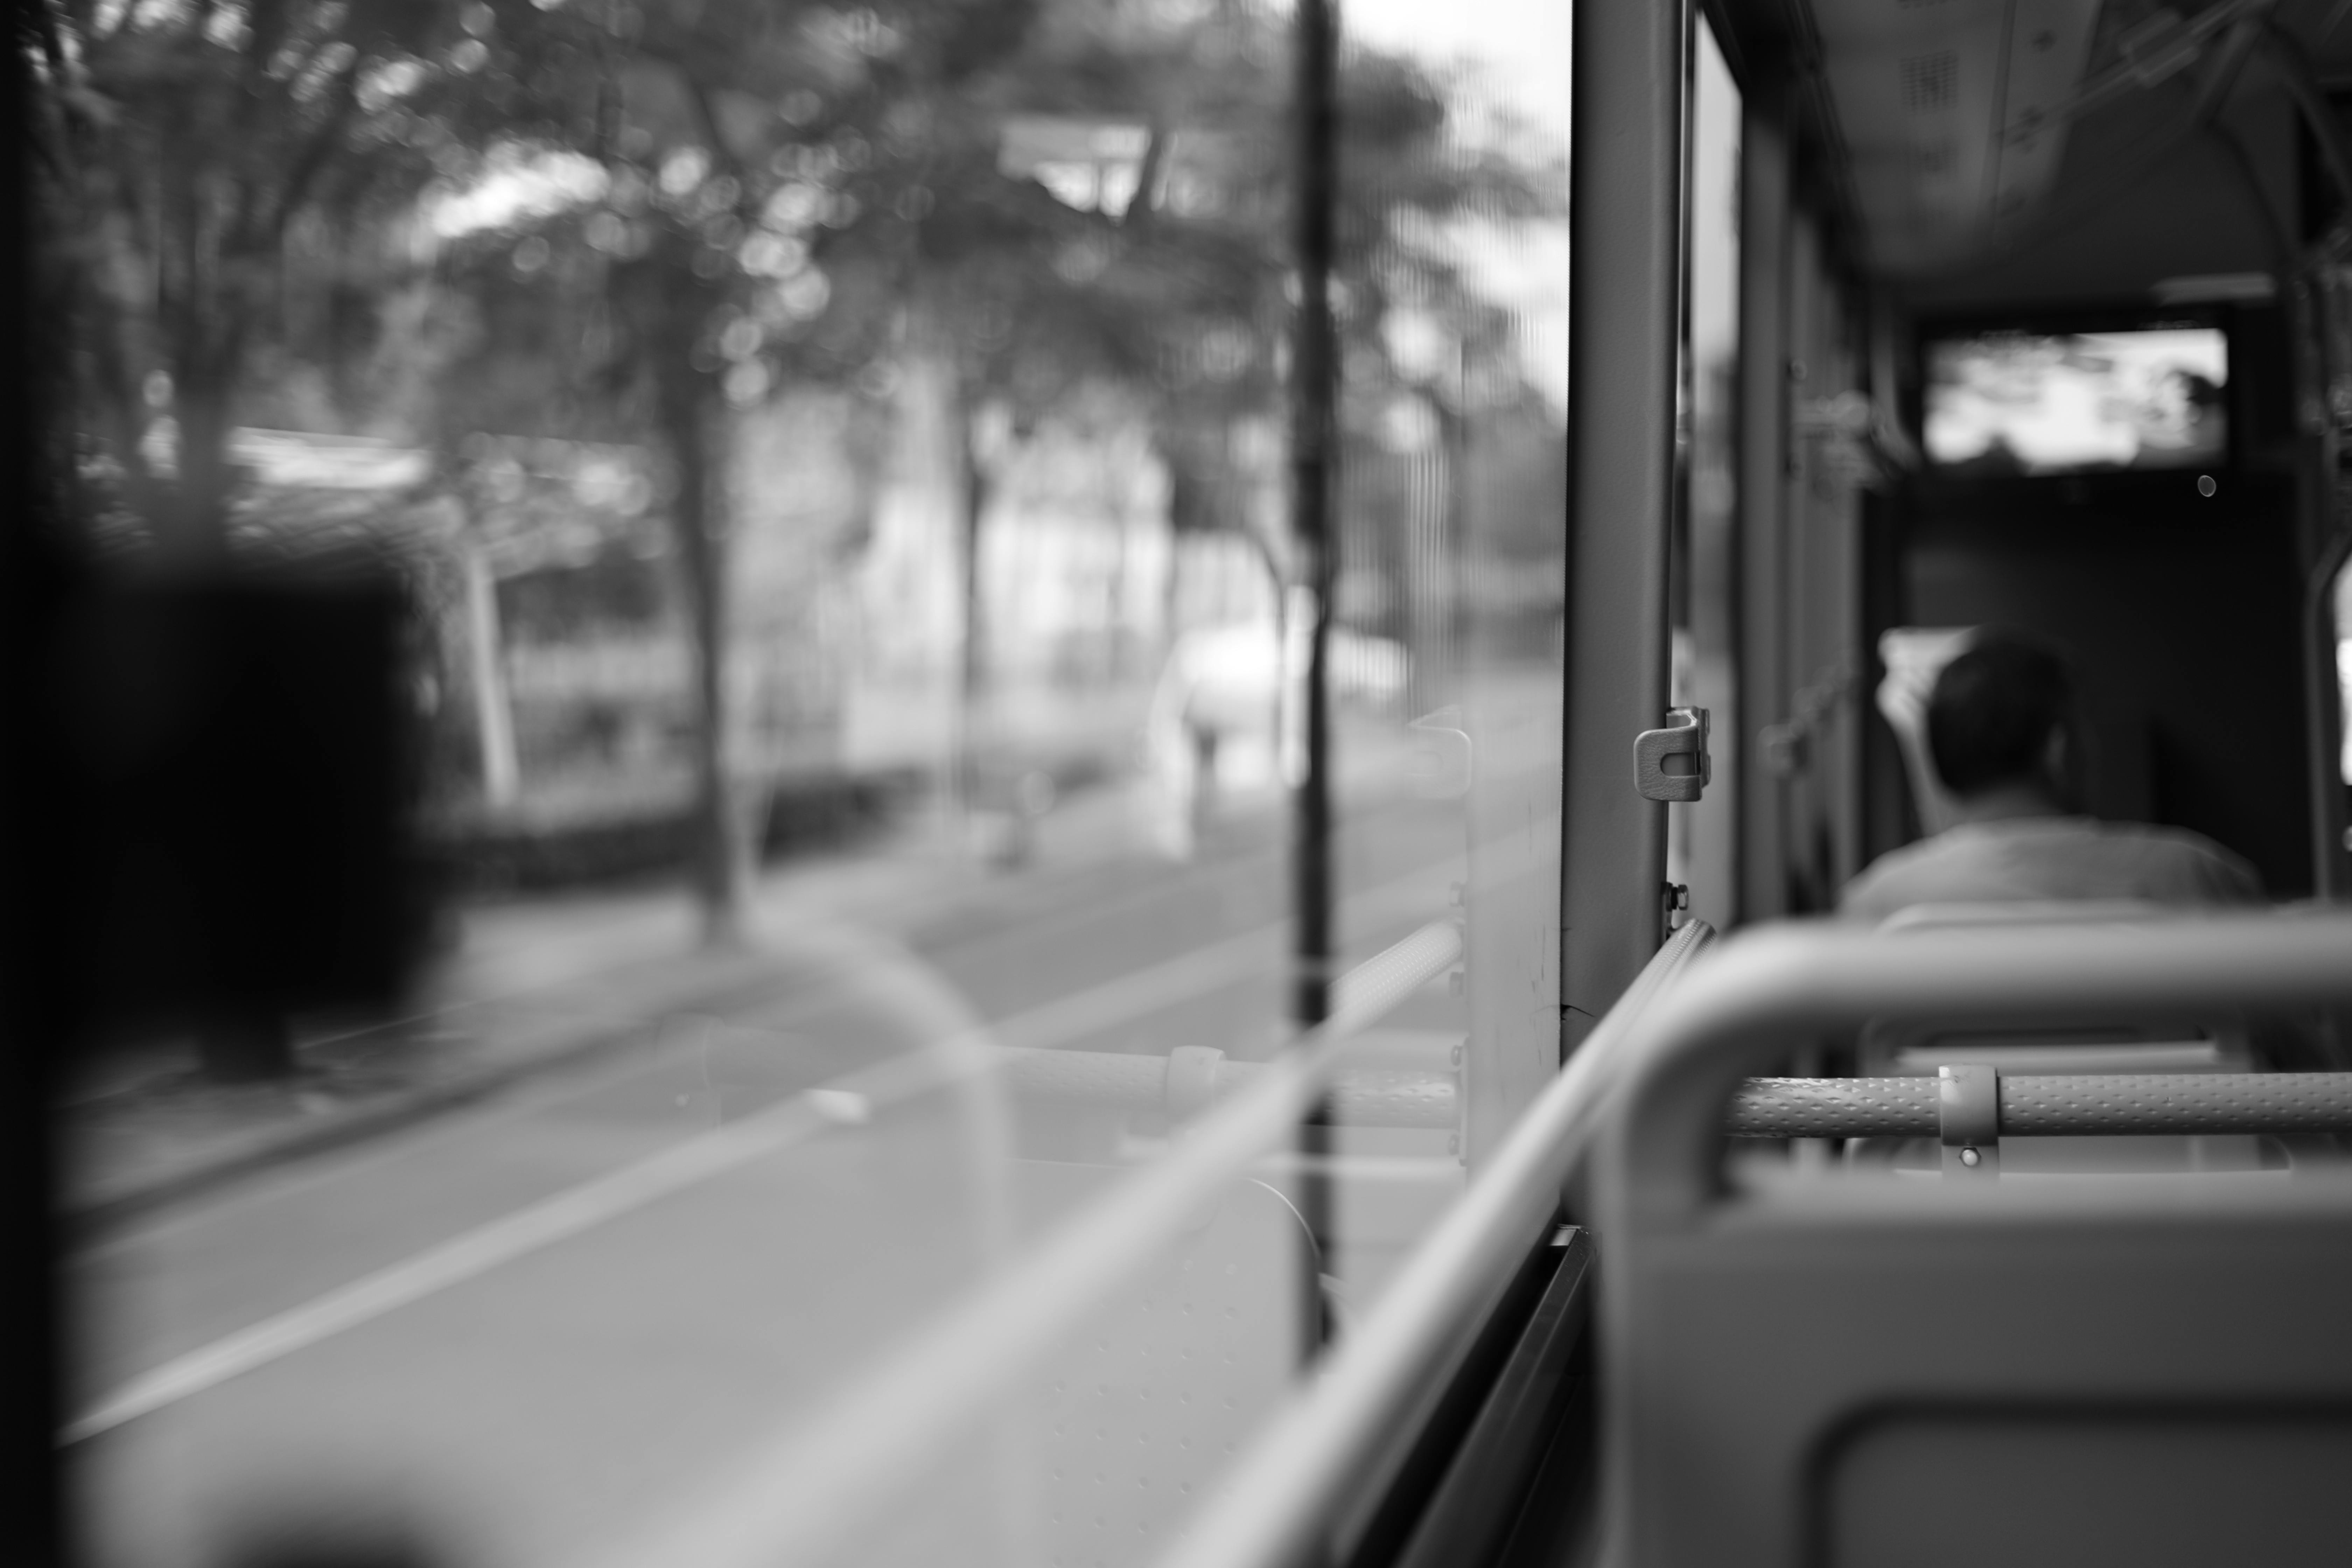 grayscale photo of a point of view of a person sitting inside a bus